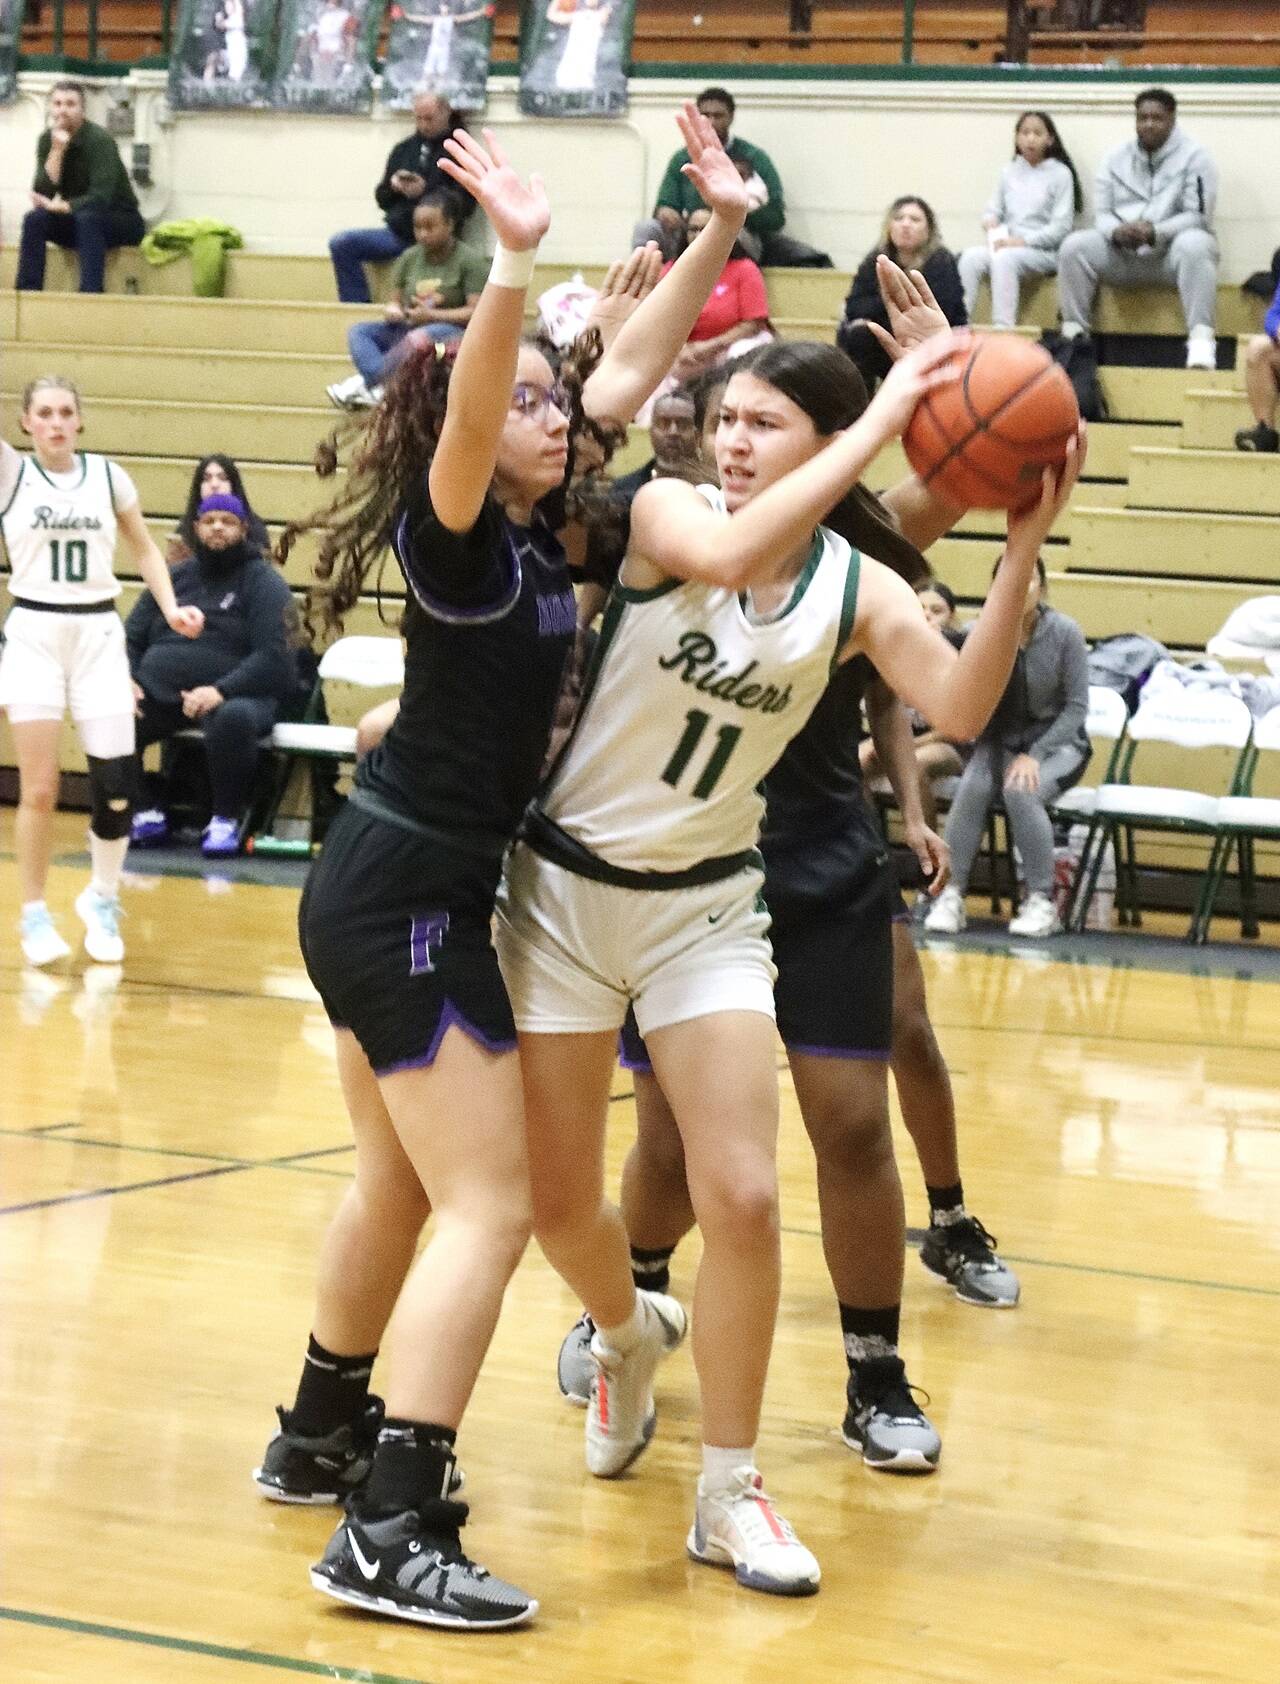 Port Angeles’ Lindsay Smith is surrounded by Foster defenders Wednesday night in Port Angeles in a bi-district playoff game. She scored 17 points as the Roughriders won 67-37 to qualify for the state 2A tournament. (Dave Logan/for Peninsula Daily News)